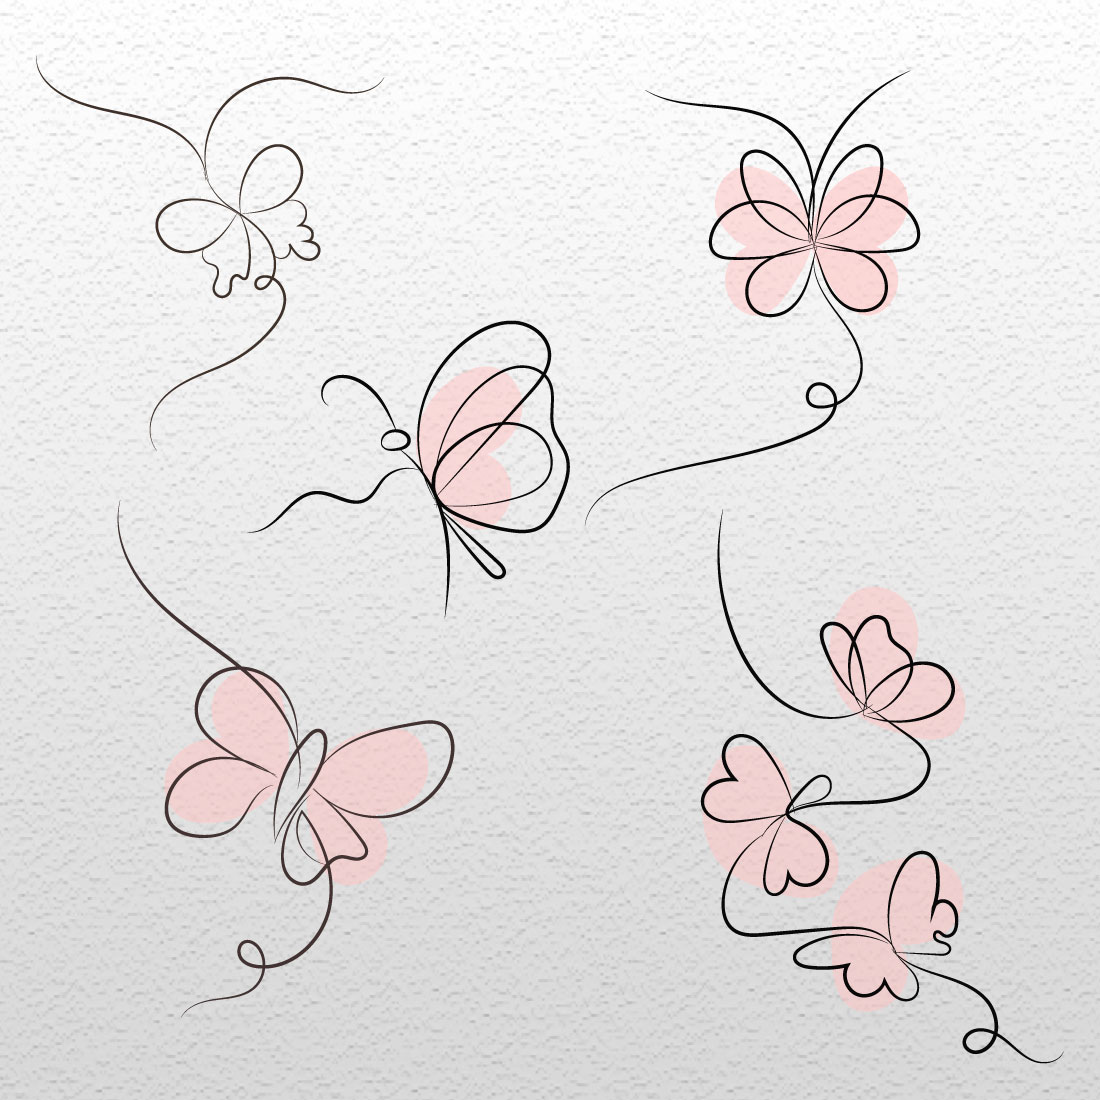 Drawing of butterflies flying in the air.